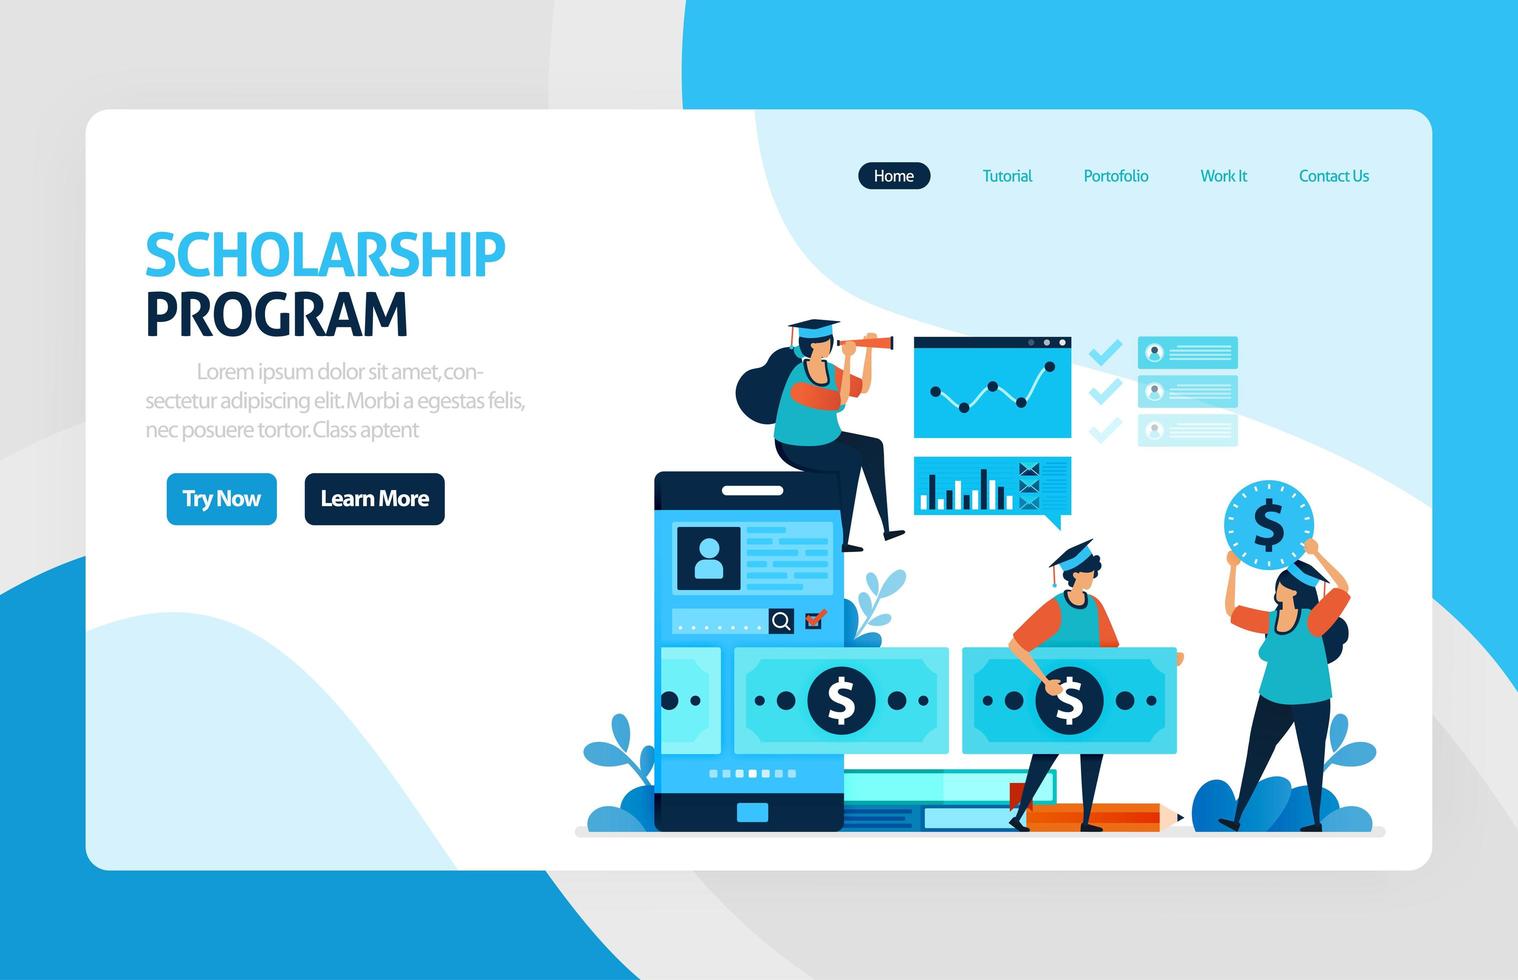 Landing page for scholarship education program, open donations and funding for outstanding student, Low interest loans for educational institutions, tuition fees. for banner, web, website, mobile apps vector